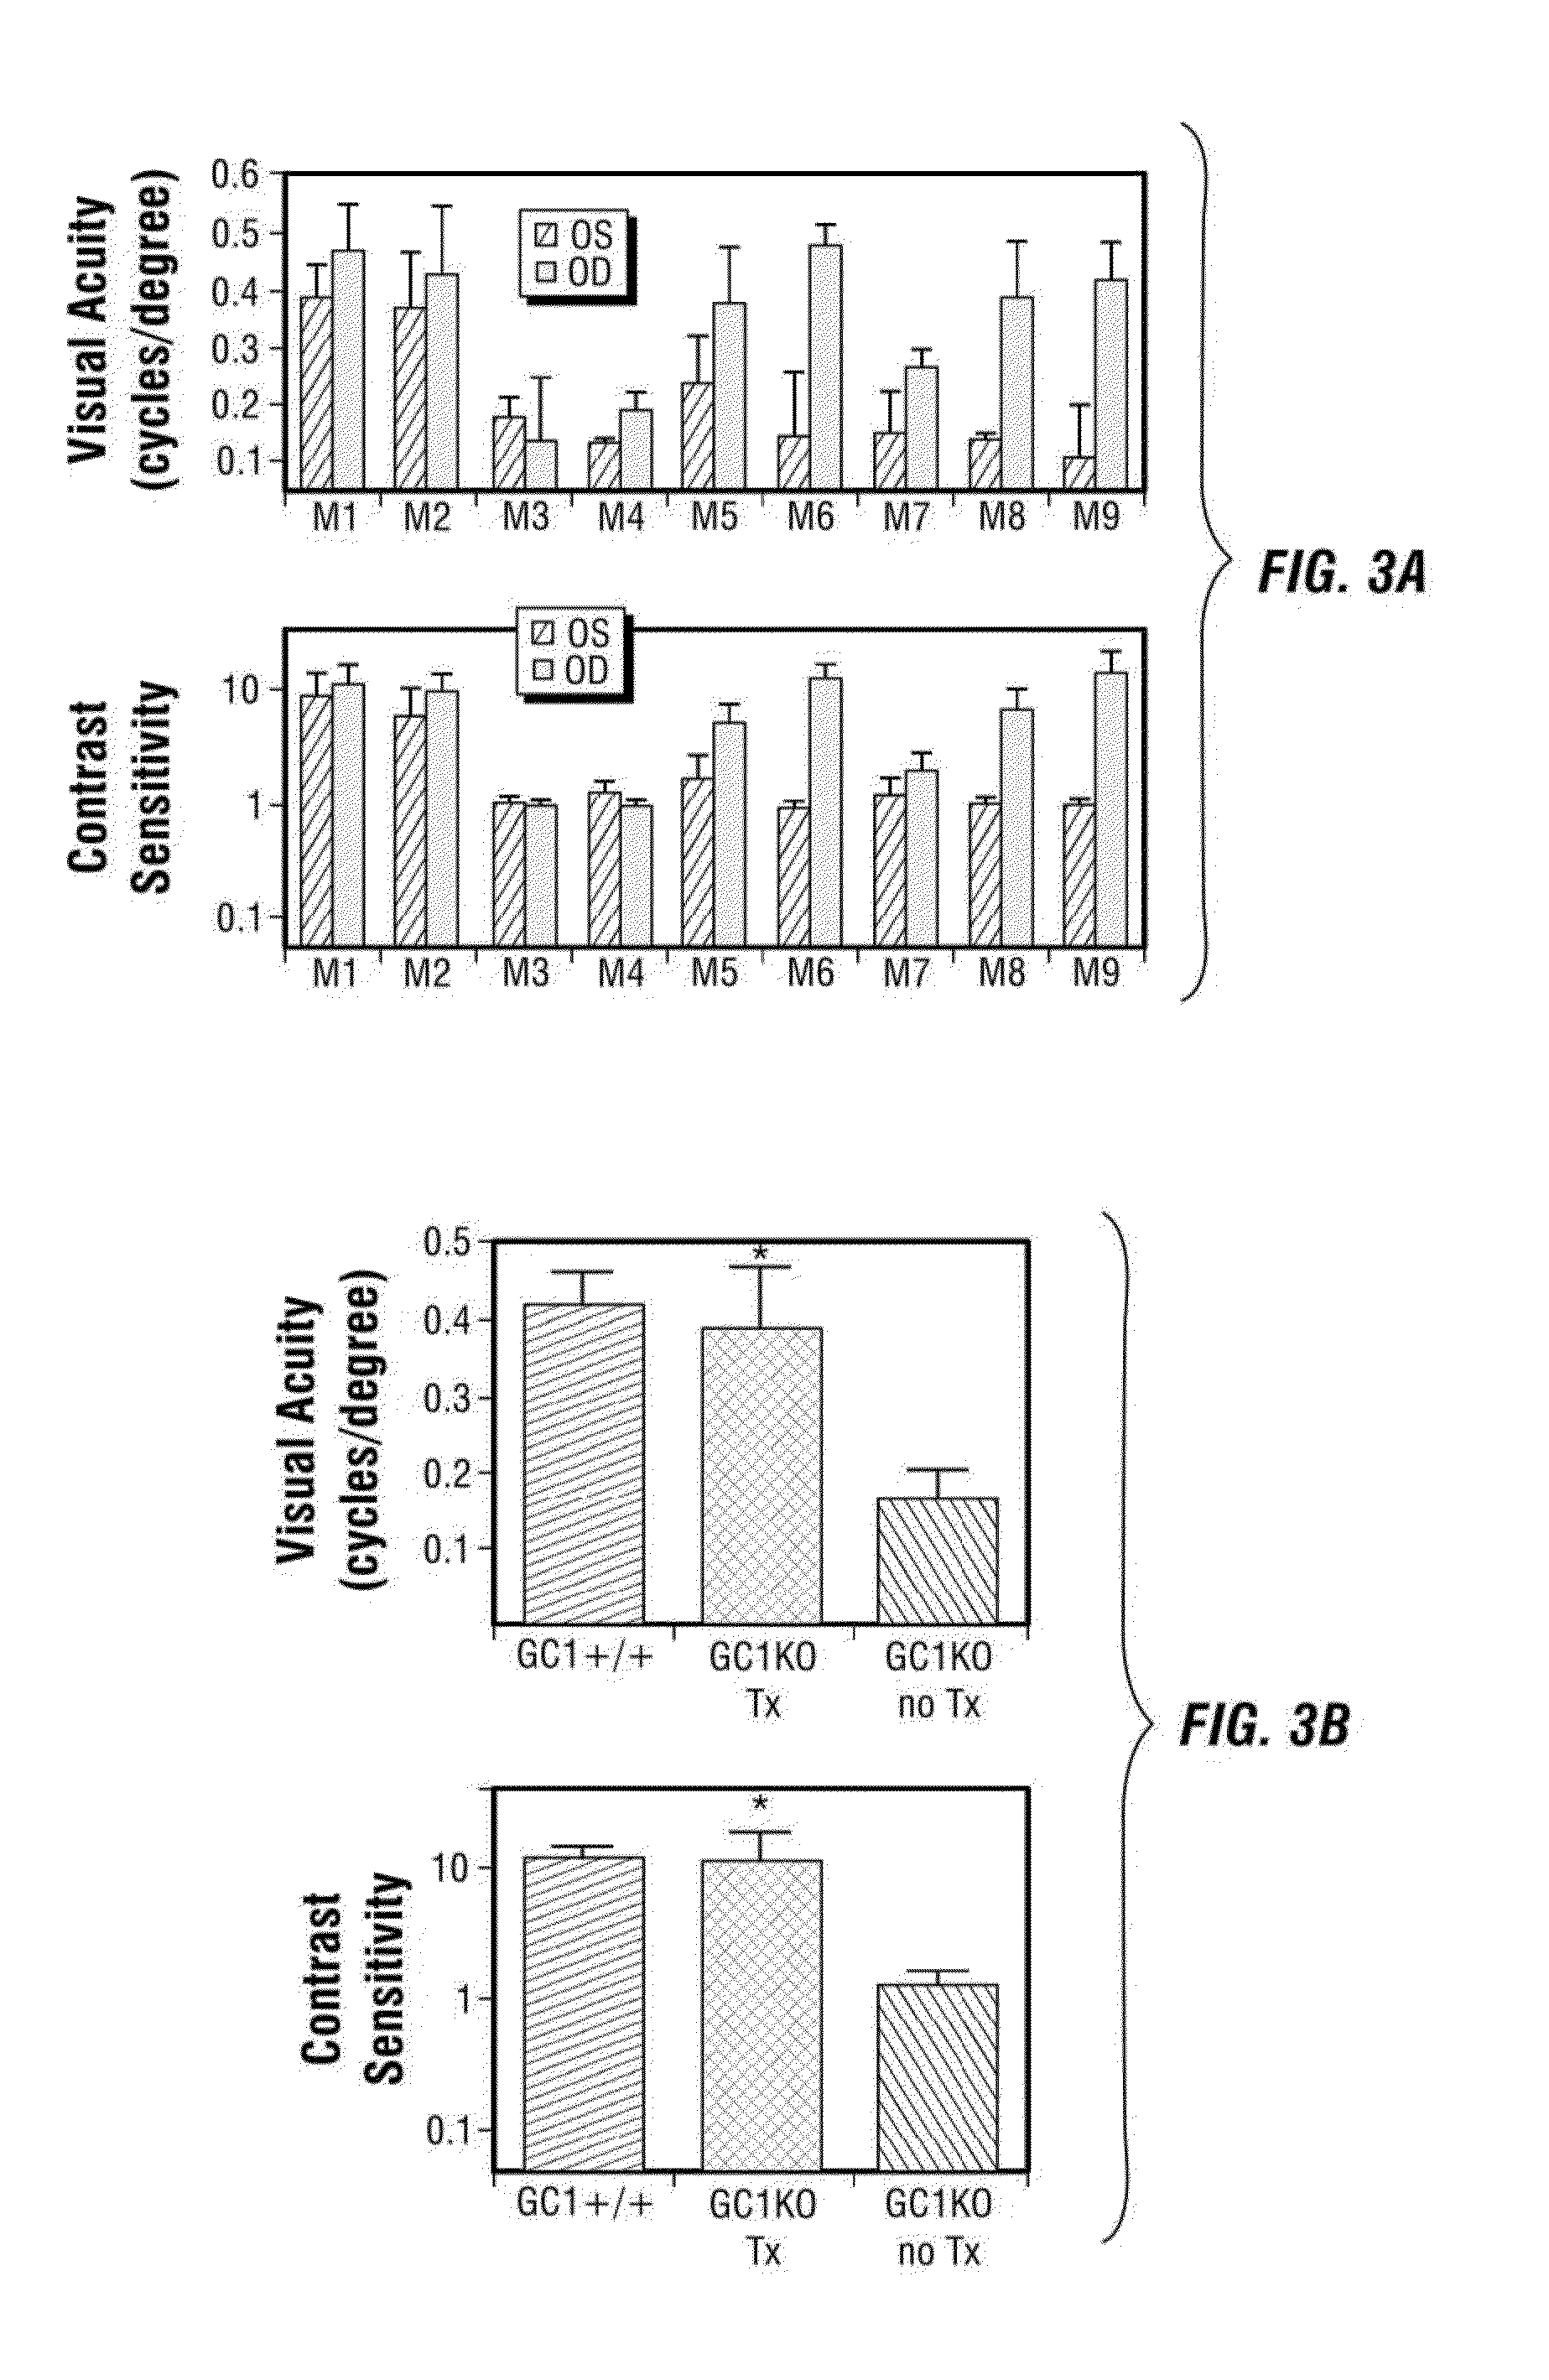 rAAV-Guanylate Cyclase Compositions and Methods for Treating Lebers Congenital Amaurosis-1 (LCA1)